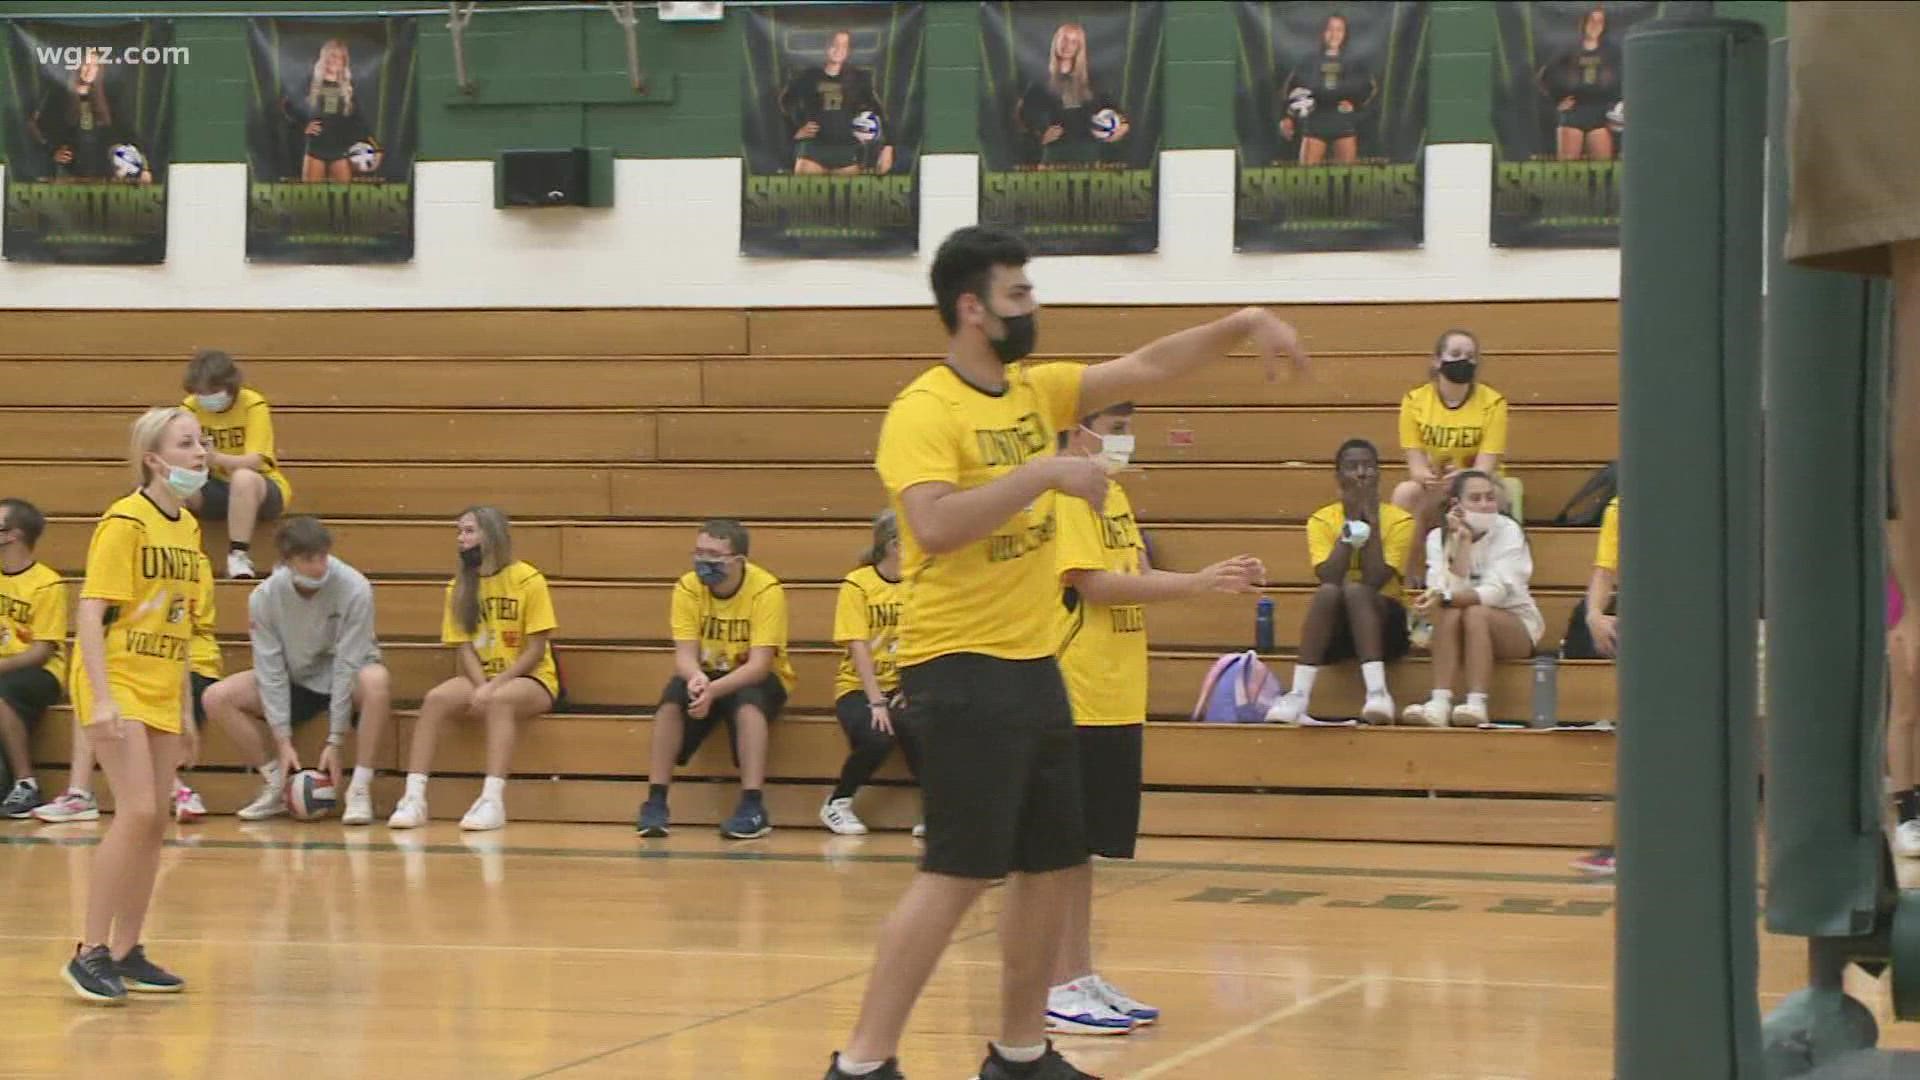 The Williamsville School District is expanding its unified sports program to include volleyball.